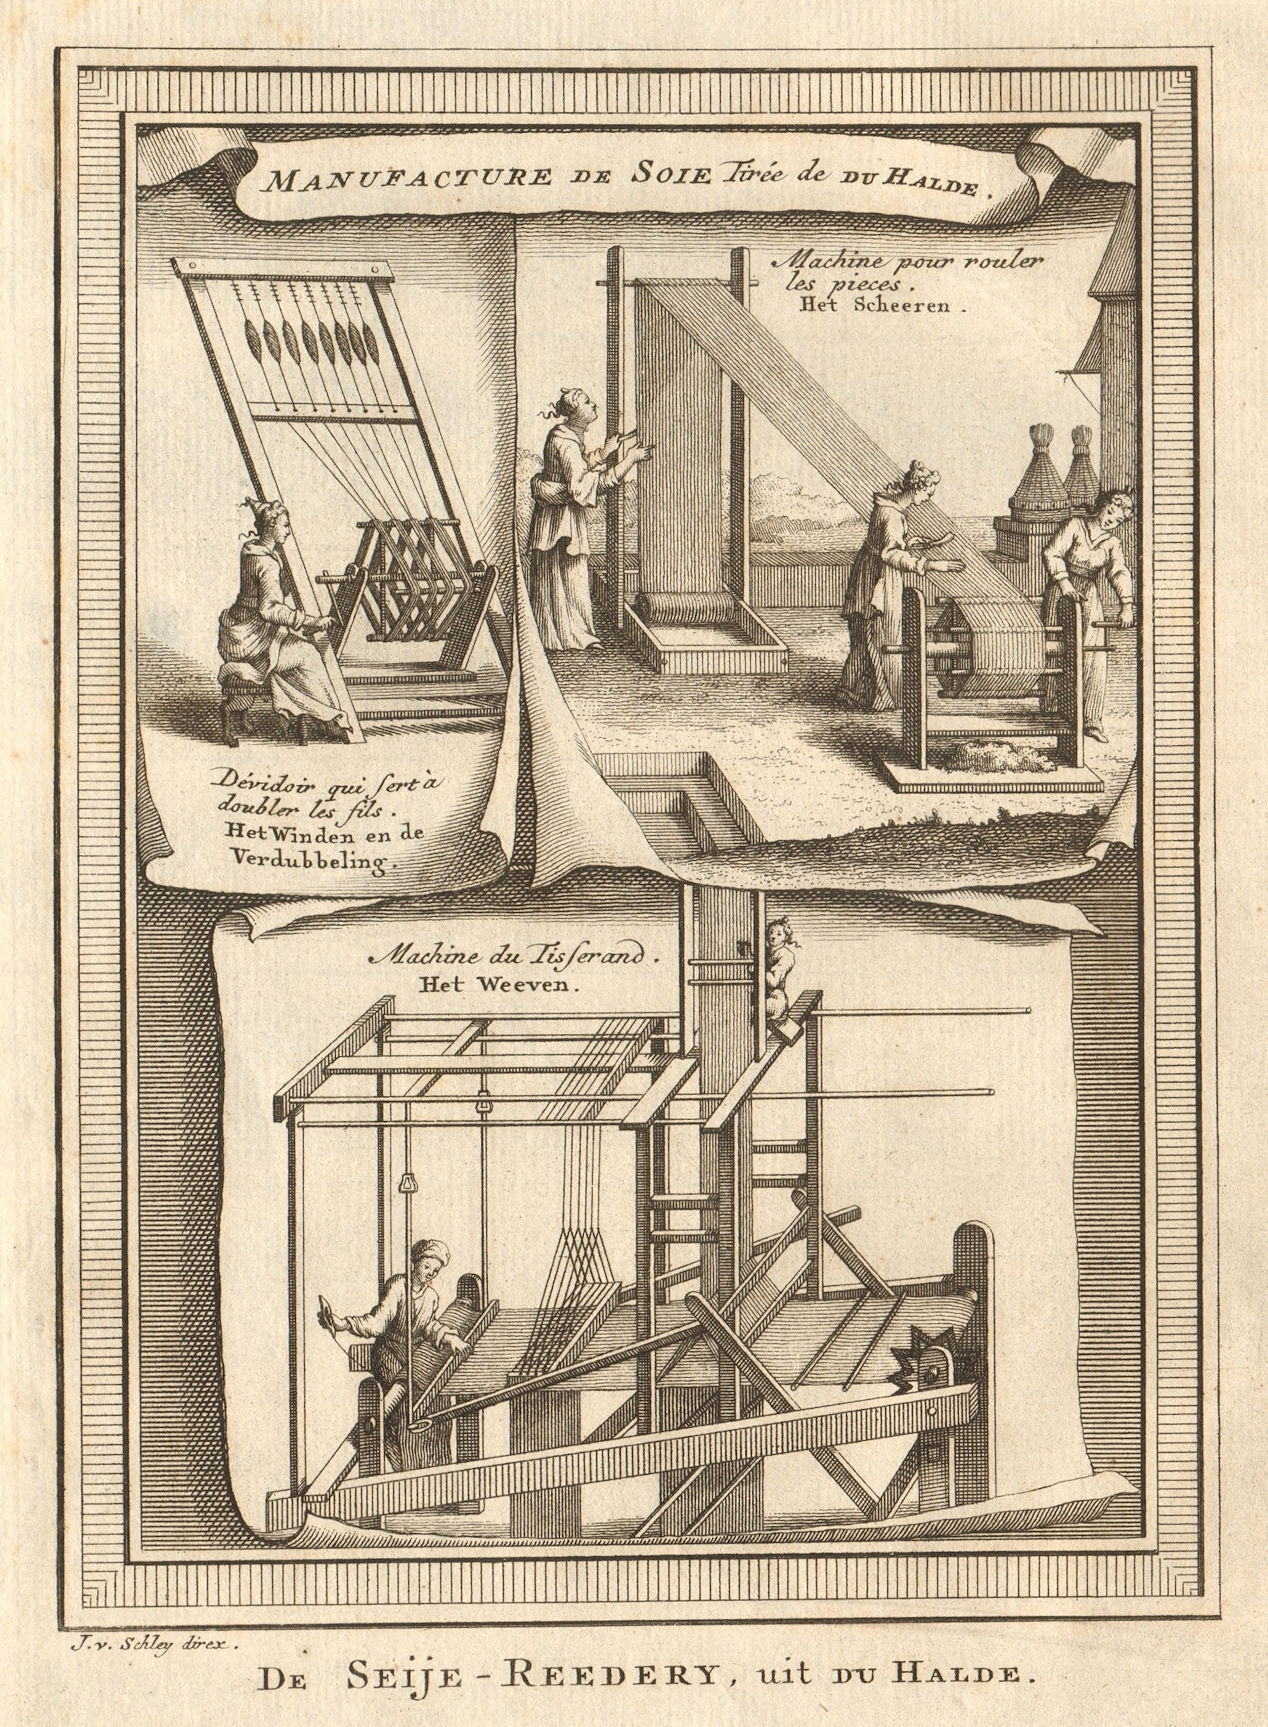 China. Silk manufacture. Machine for doubling filaments. Weaving. SCHLEY 1749